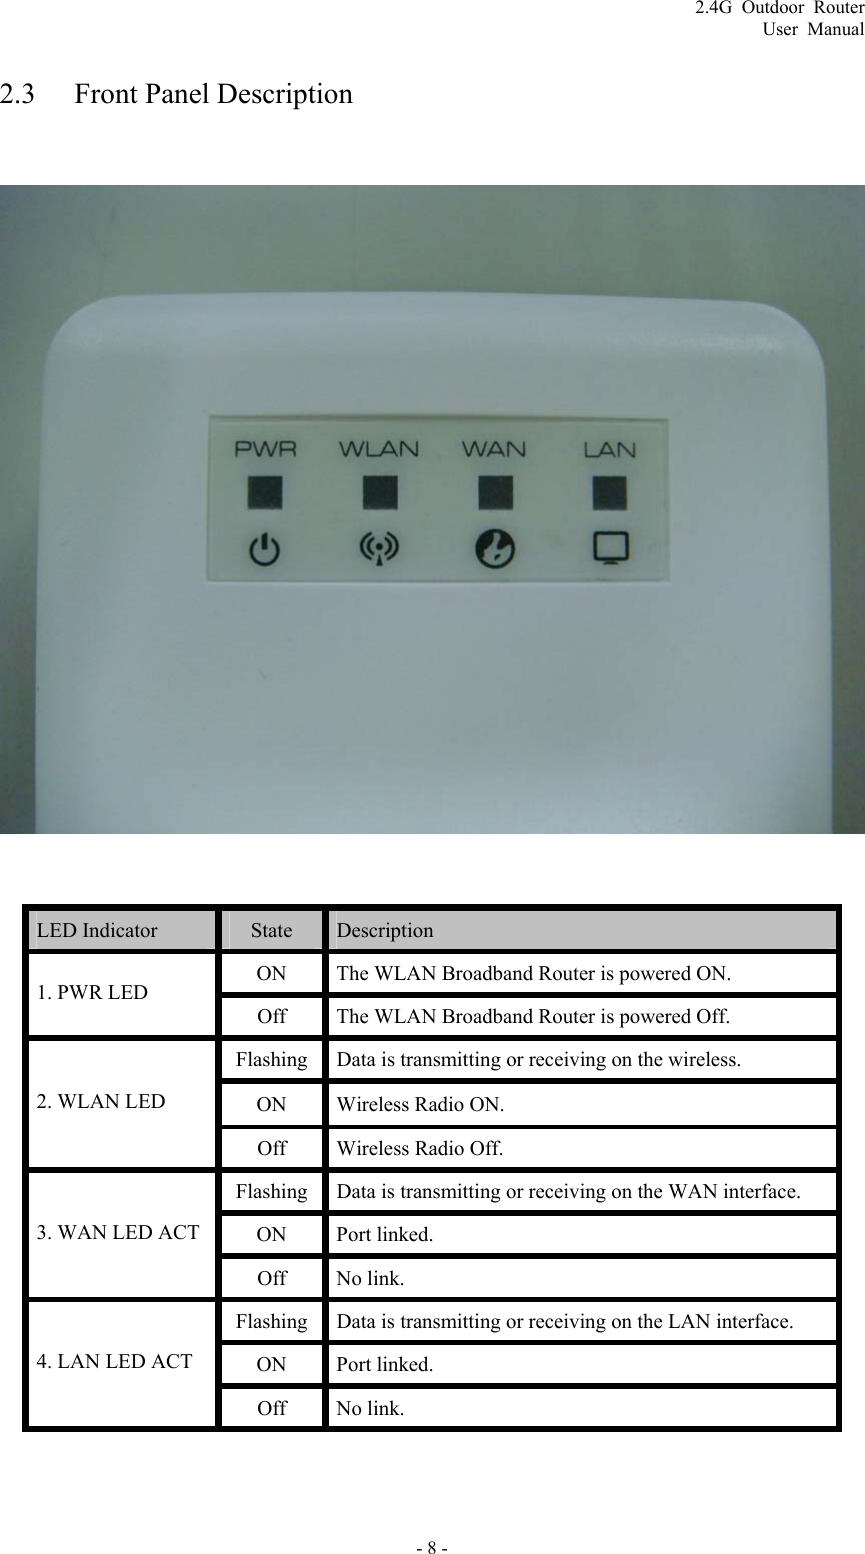 2.4G Outdoor Router User Manual 2.3 Front Panel Description    LED Indicator    State   Description  ON  The WLAN Broadband Router is powered ON.   1. PWR LED   Off  The WLAN Broadband Router is powered Off.   Flashing  Data is transmitting or receiving on the wireless.   ON  Wireless Radio ON.   2. WLAN LED   Off  Wireless Radio Off. Flashing  Data is transmitting or receiving on the WAN interface.   ON Port linked.  3. WAN LED ACT   Off No link.  Flashing  Data is transmitting or receiving on the LAN interface.   ON Port linked.  4. LAN LED ACT   Off No link.  - 8 - 